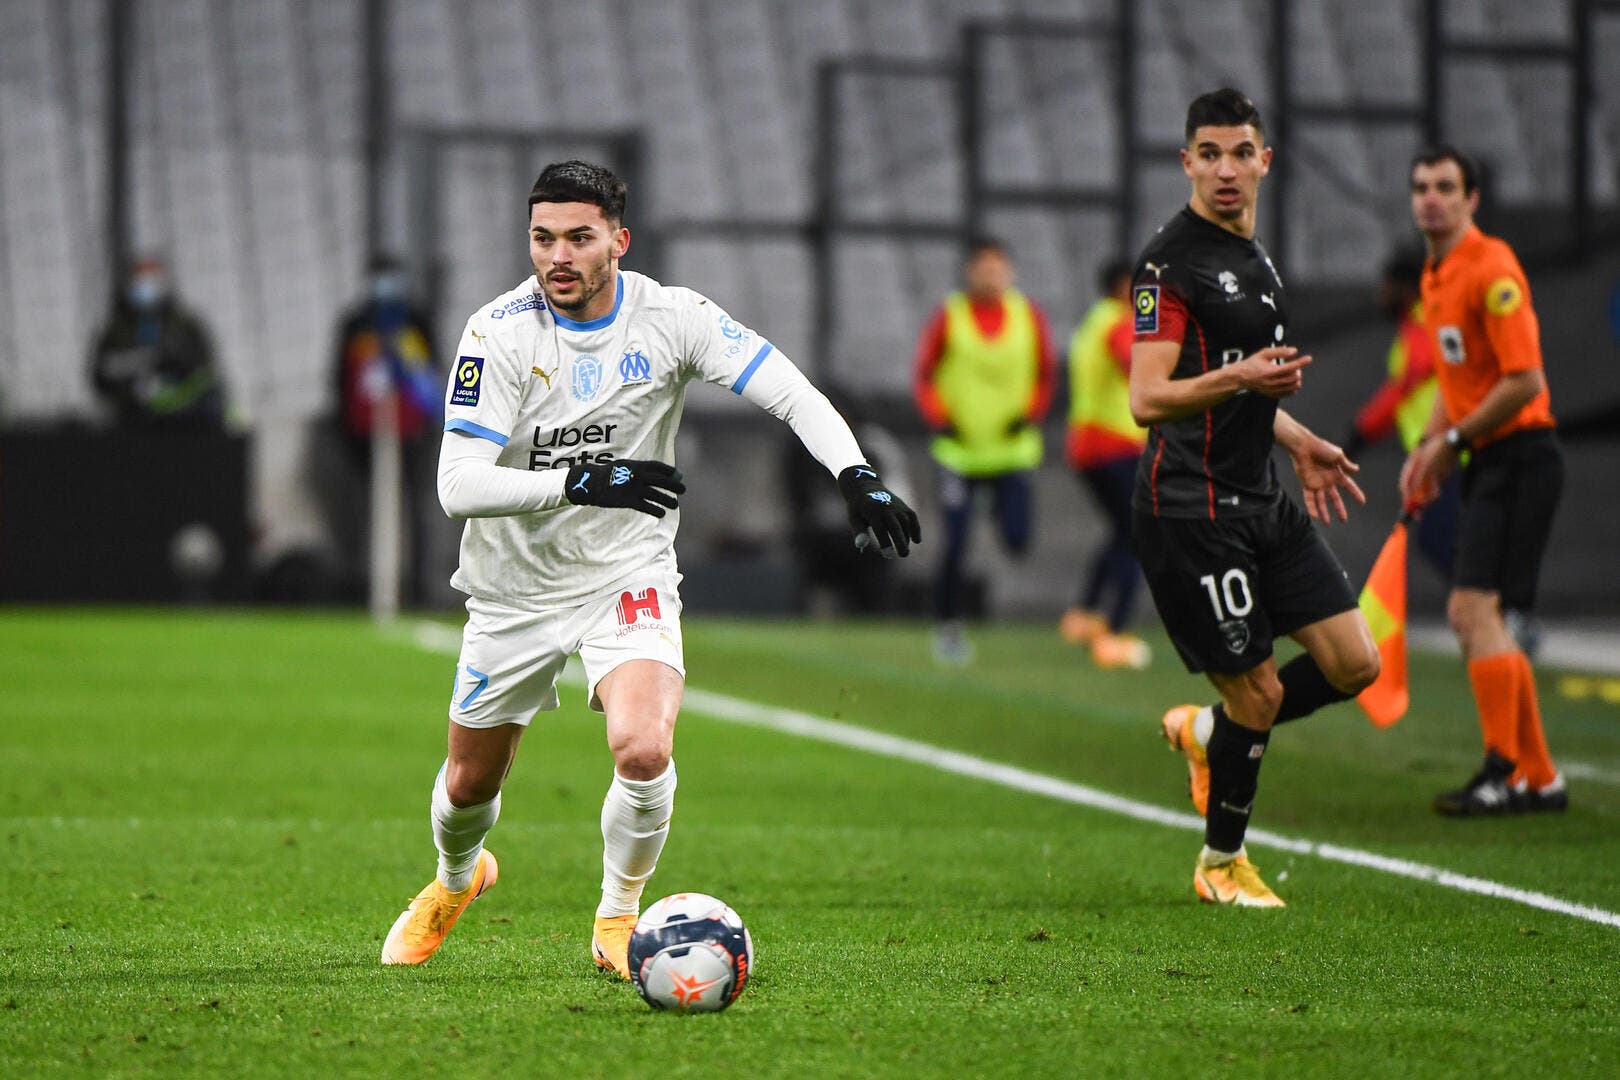 Foot OM - OM: Jacques Bayle puts 3 Marseillais out - World Today News